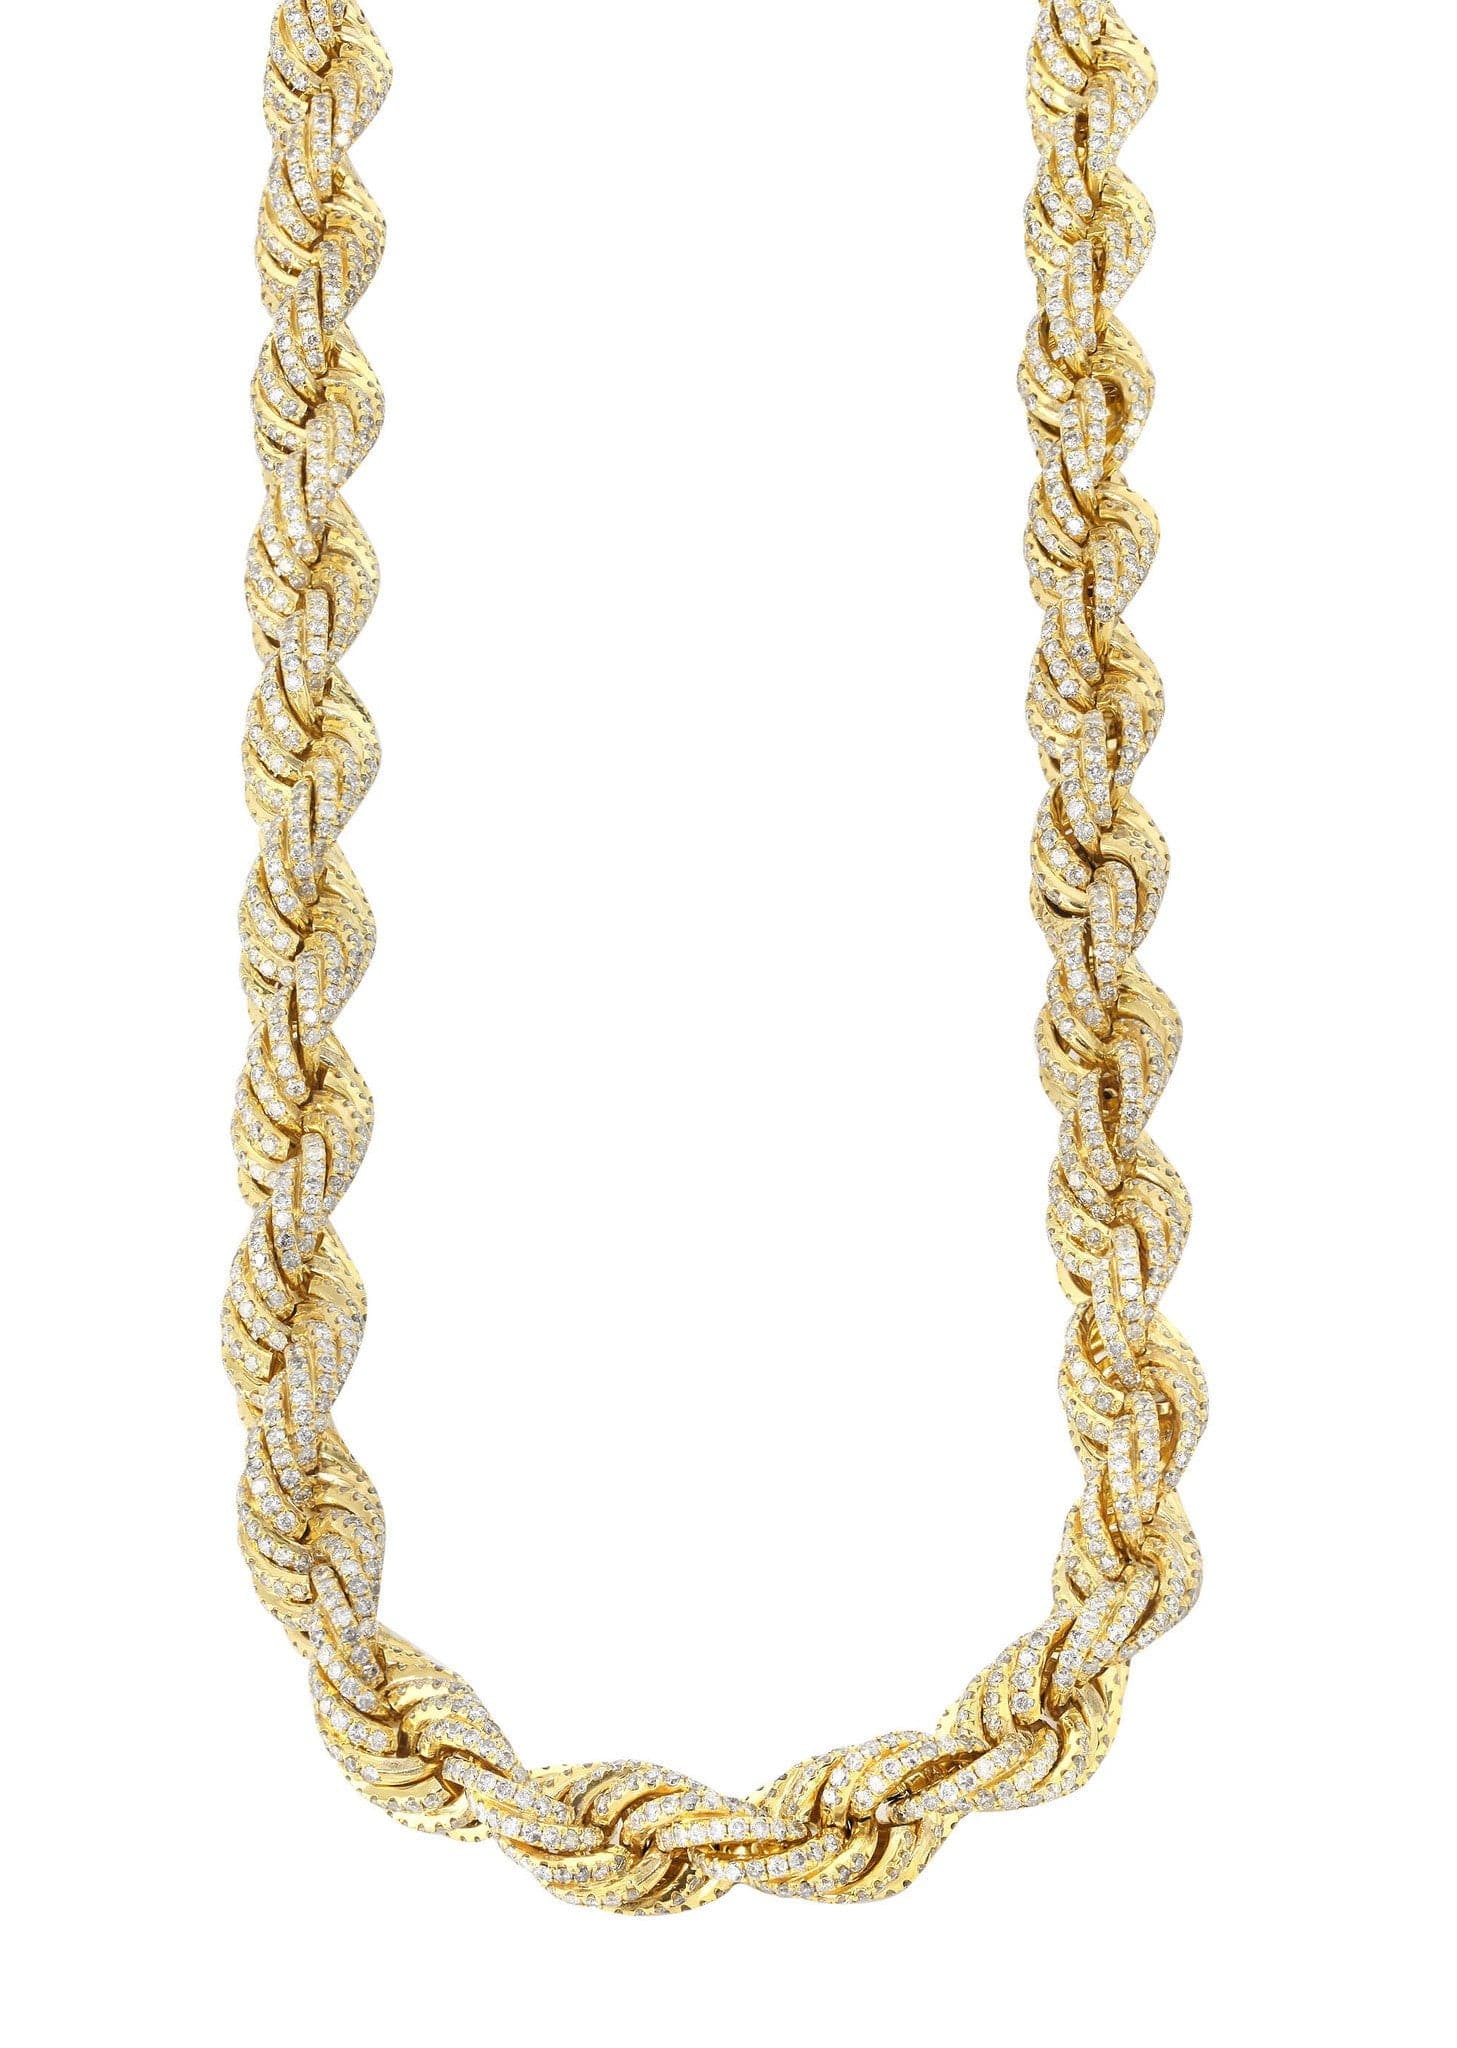 Iced Out Rope Chain | 72.92 Carats | 12 